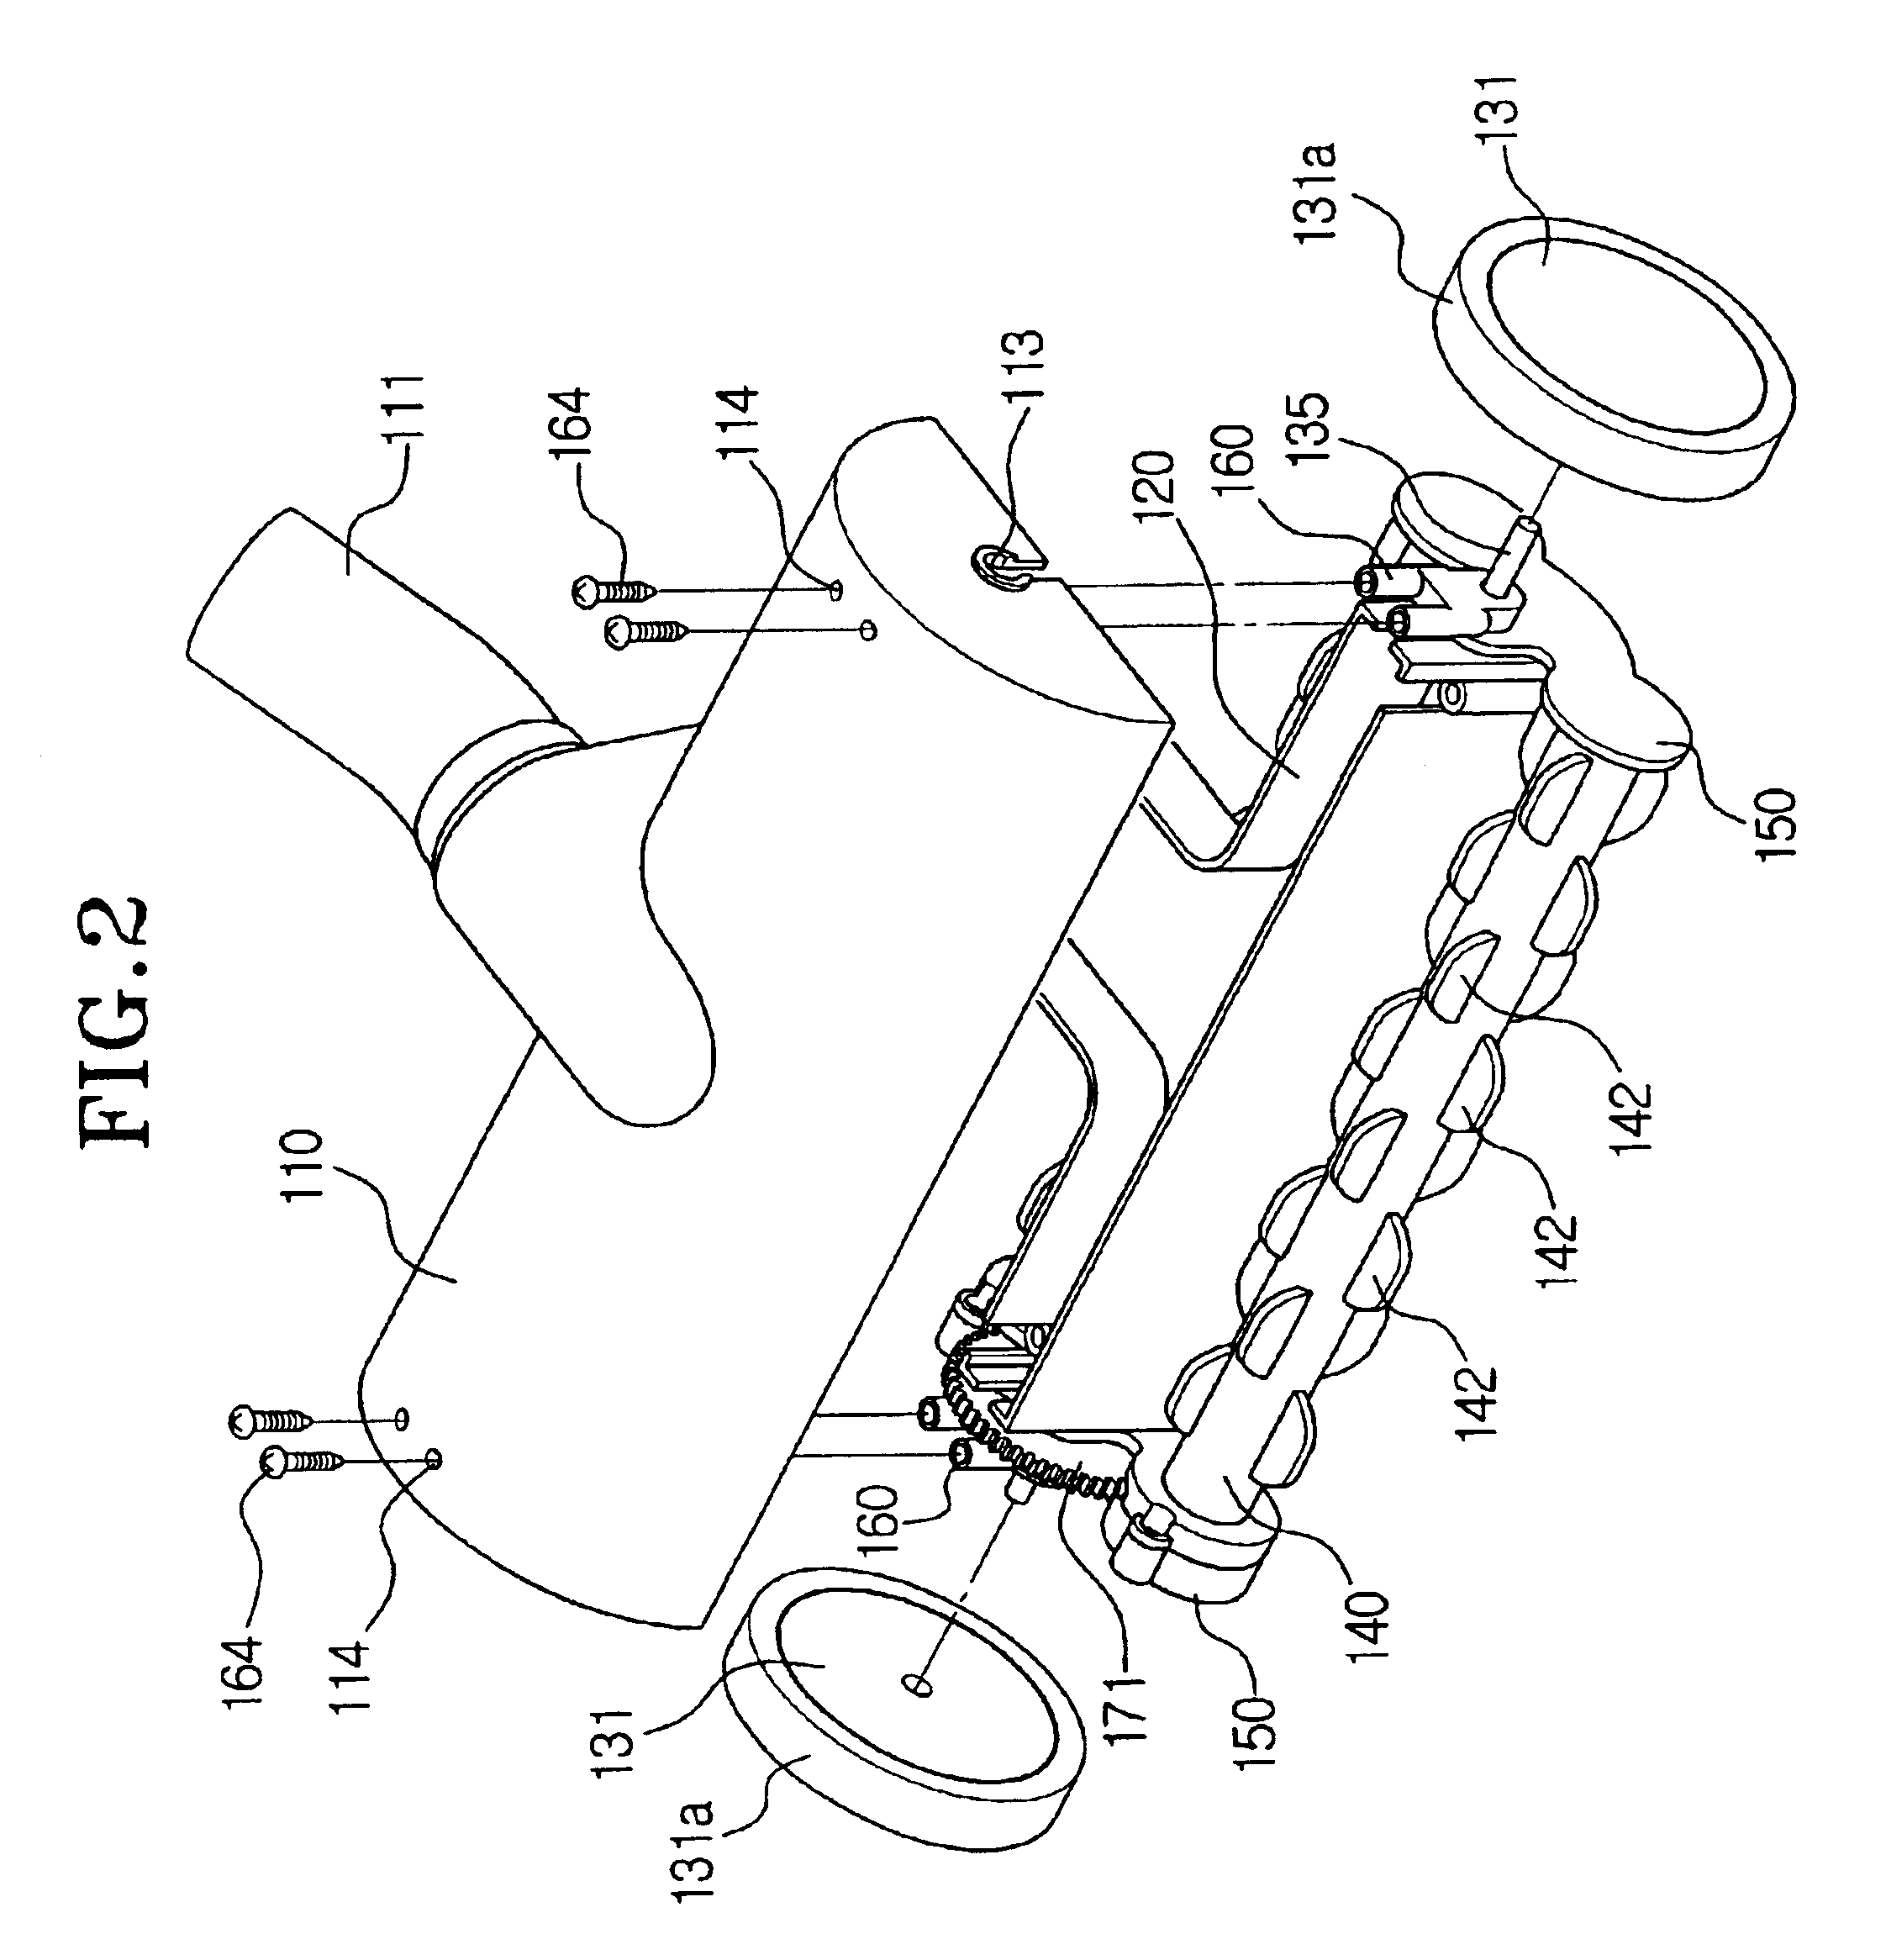 Suction brush assembly having rotation roller for sweeping dust